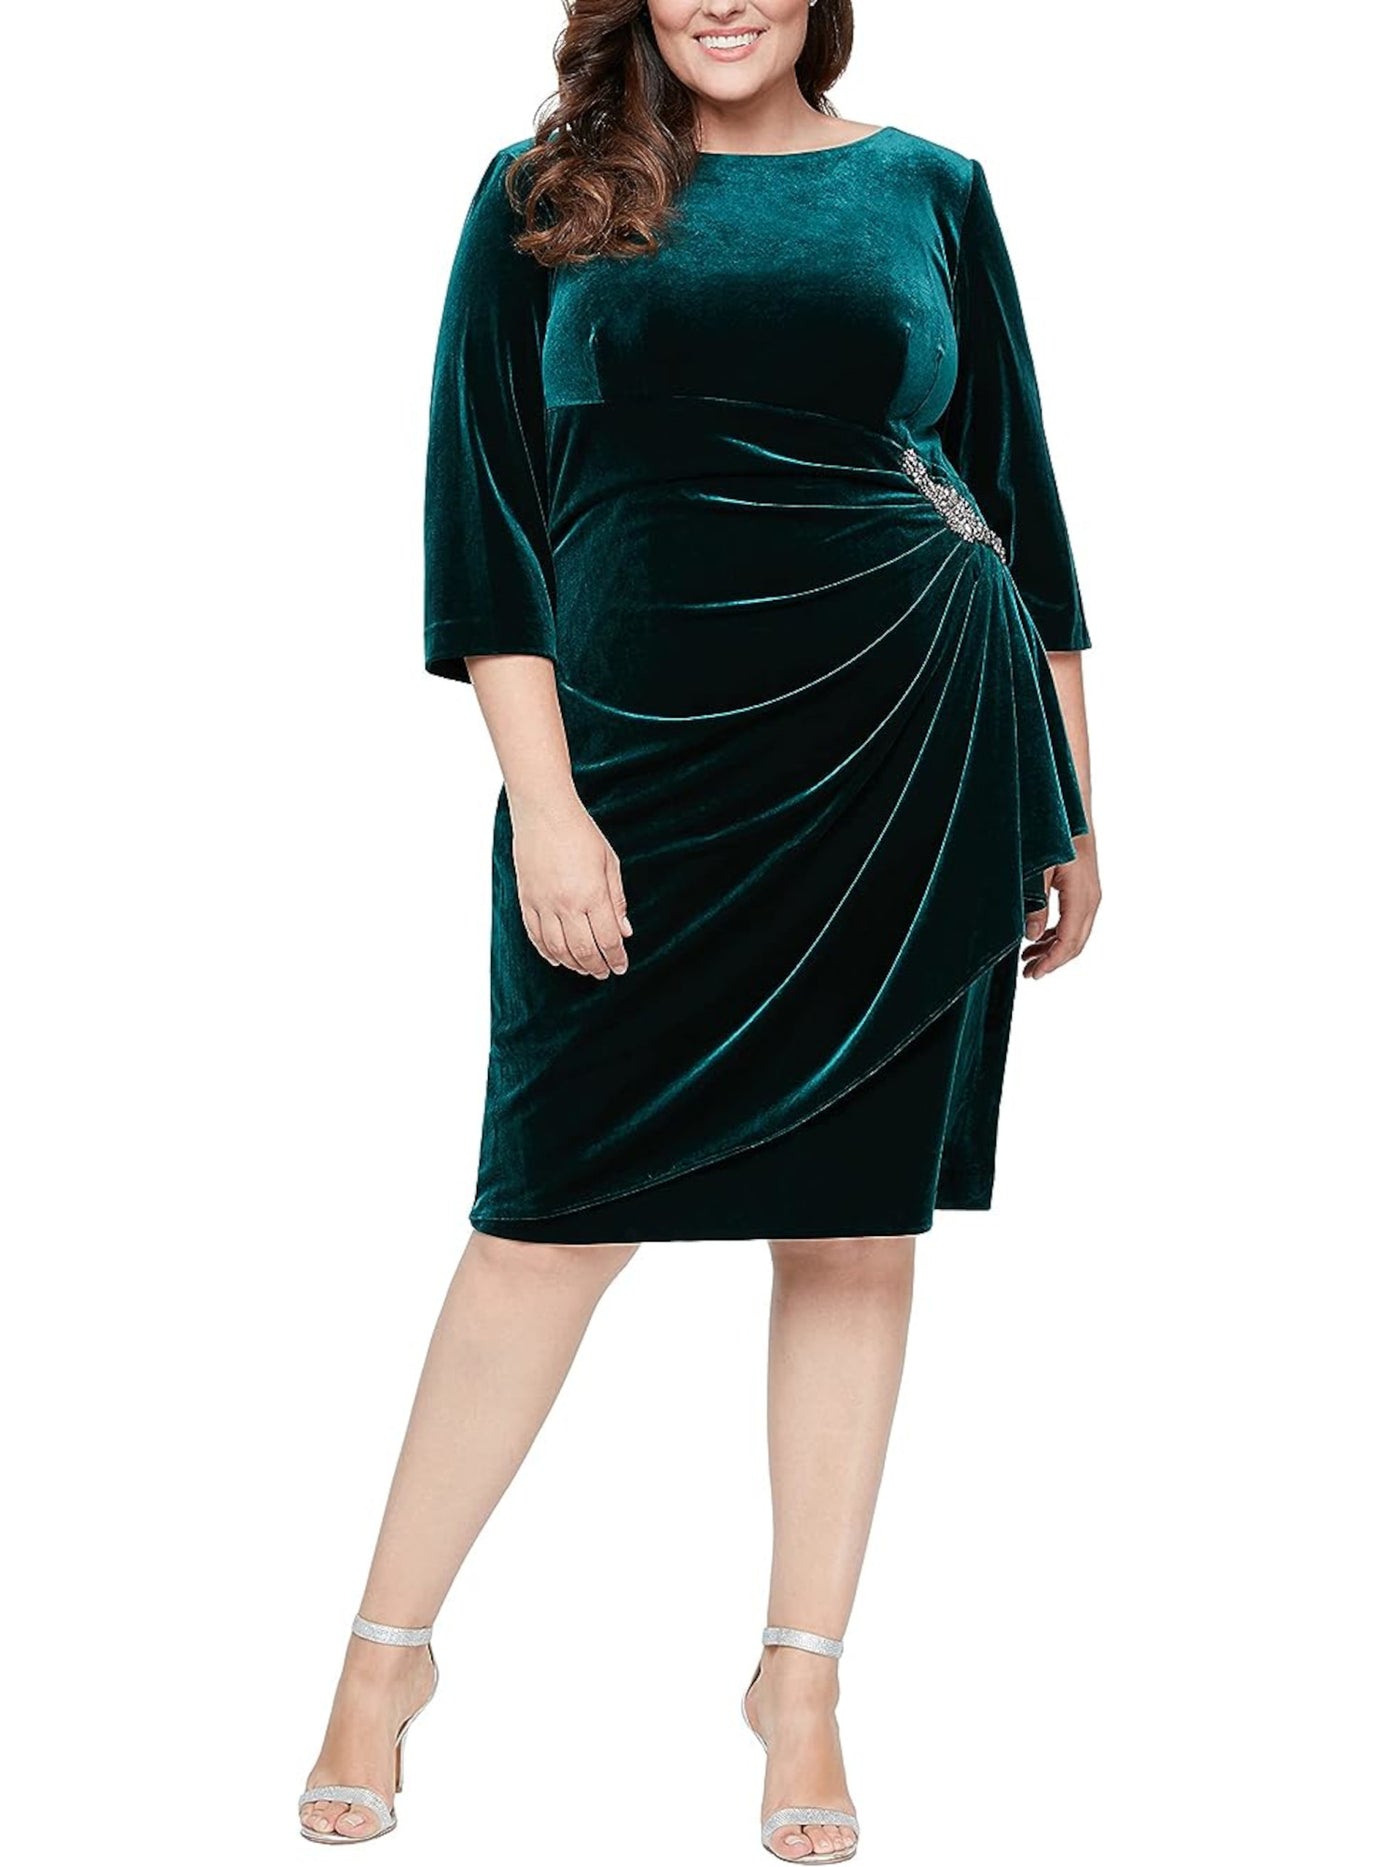 ALEX EVENINGS WOMAN Womens Green Stretch Embellished Zippered Pleated Velvet Lined 3/4 Sleeve Round Neck Knee Length Formal Sheath Dress Plus 14W